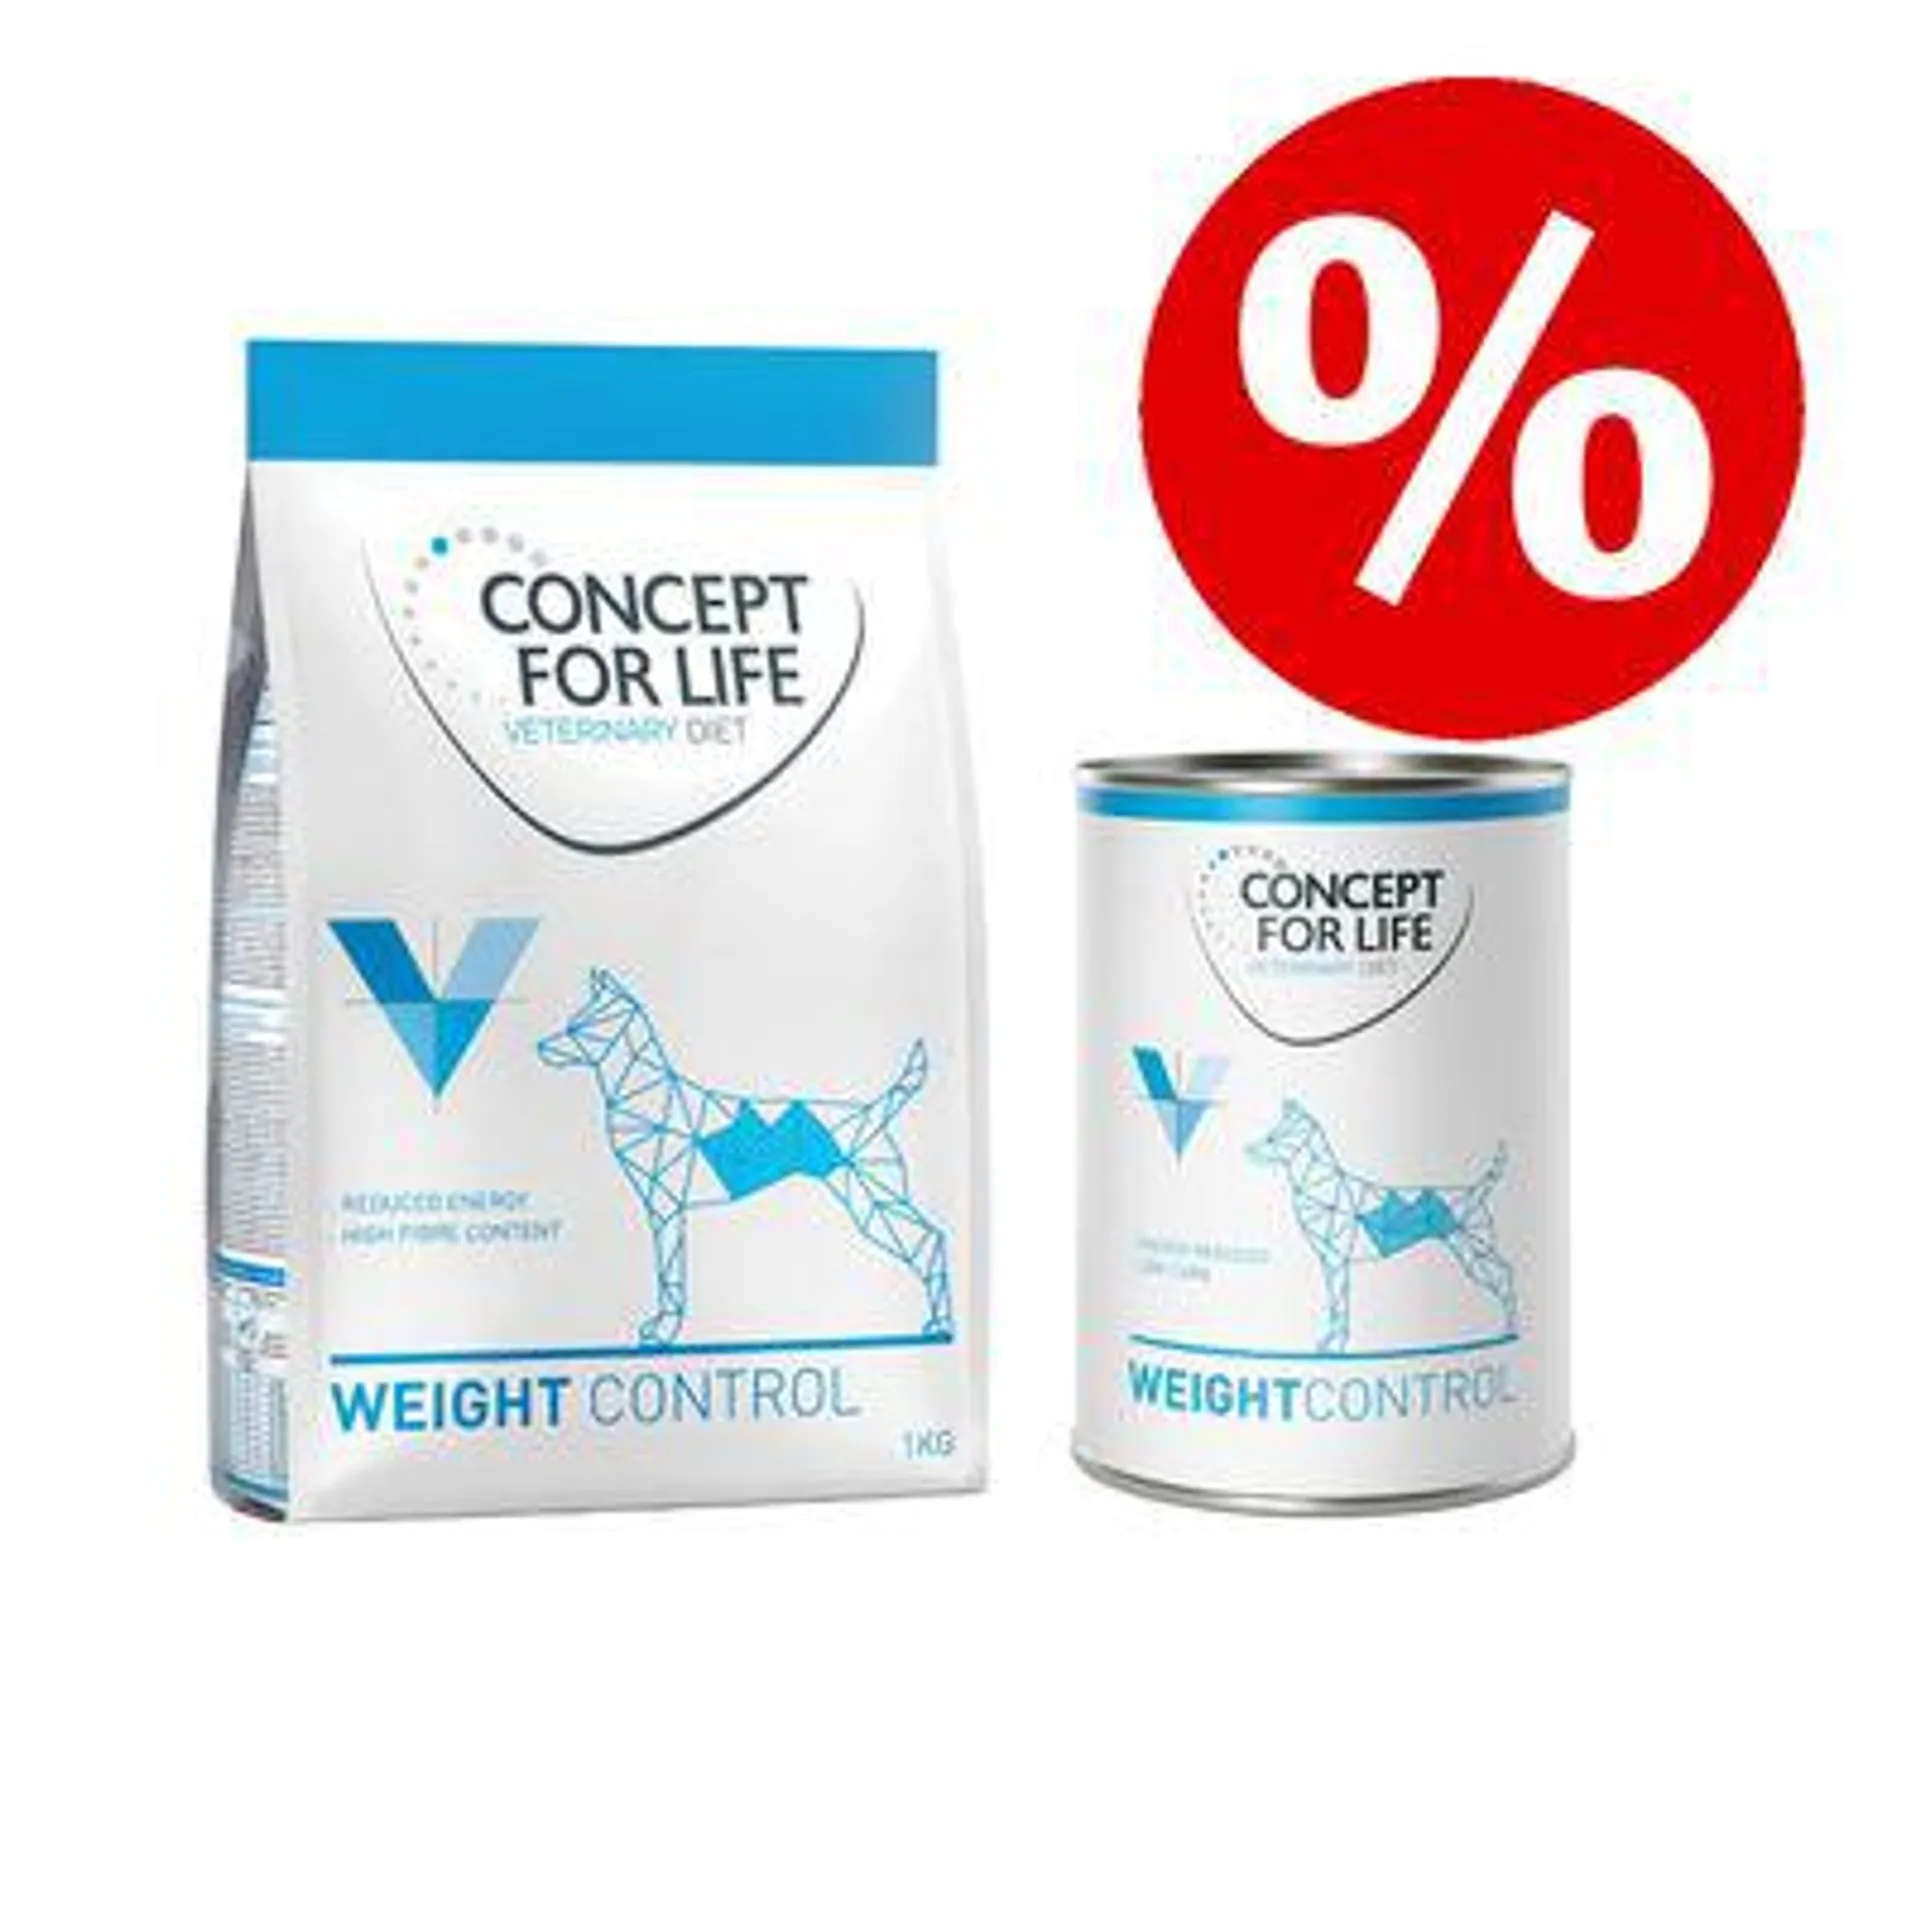 1kg Concept for Life Veterinary Diet Dry Dog Food + Wet Dog Food - Trial Price!*